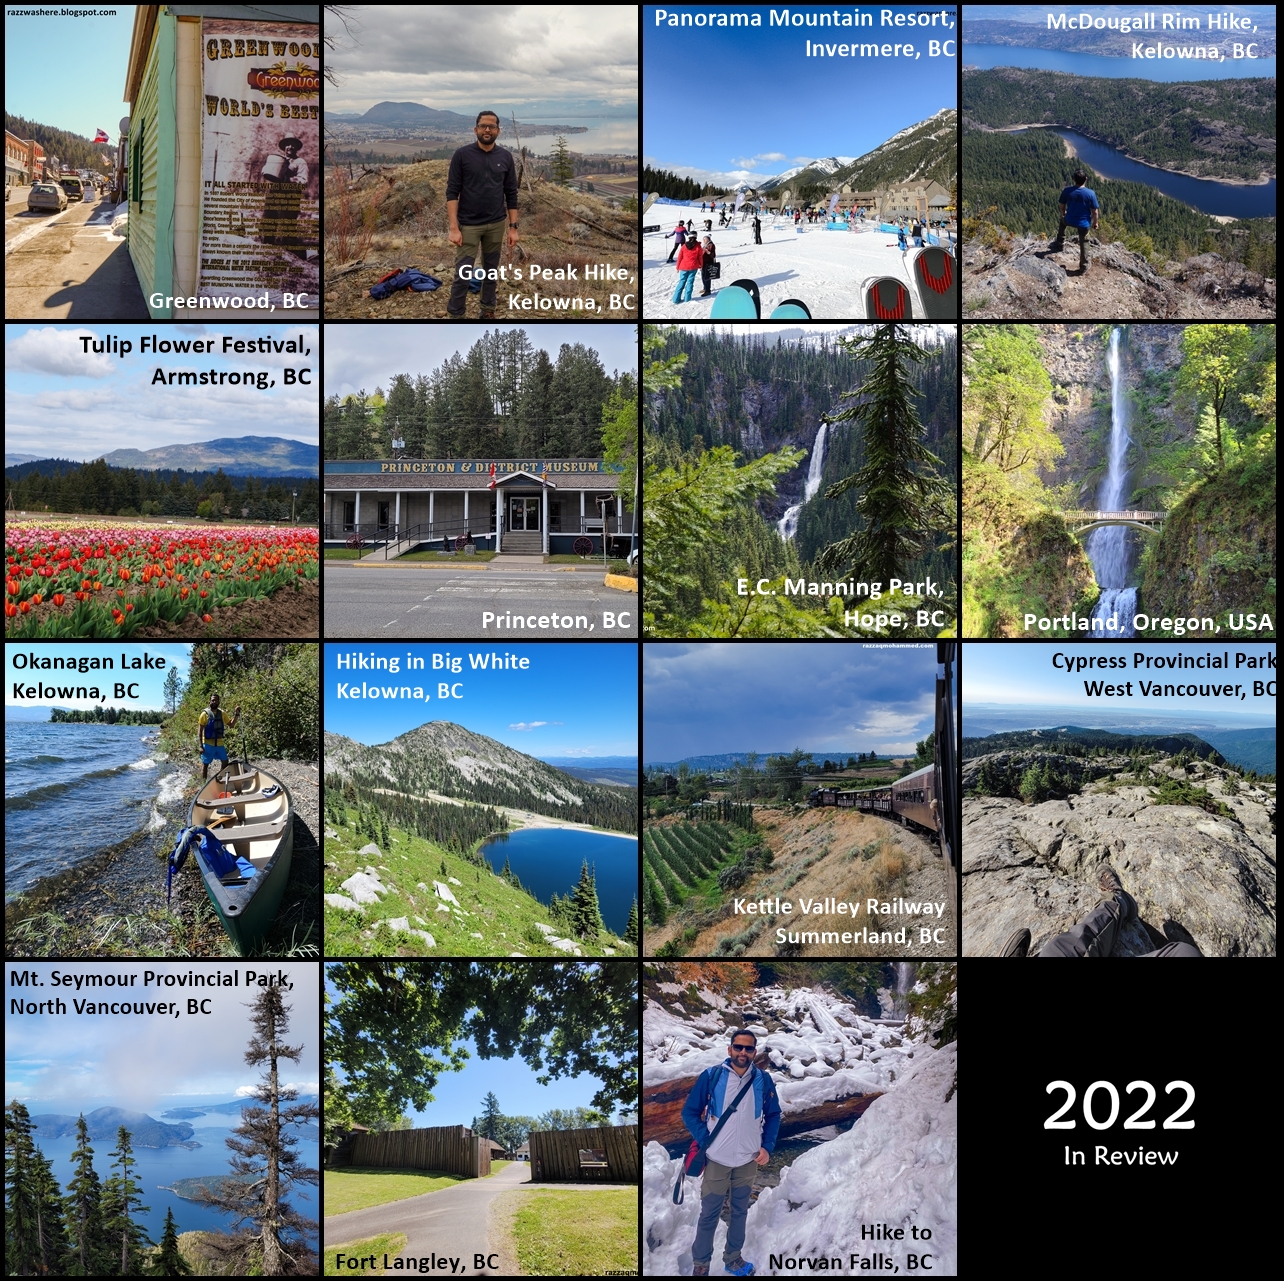 Travel : In Review Year 2022